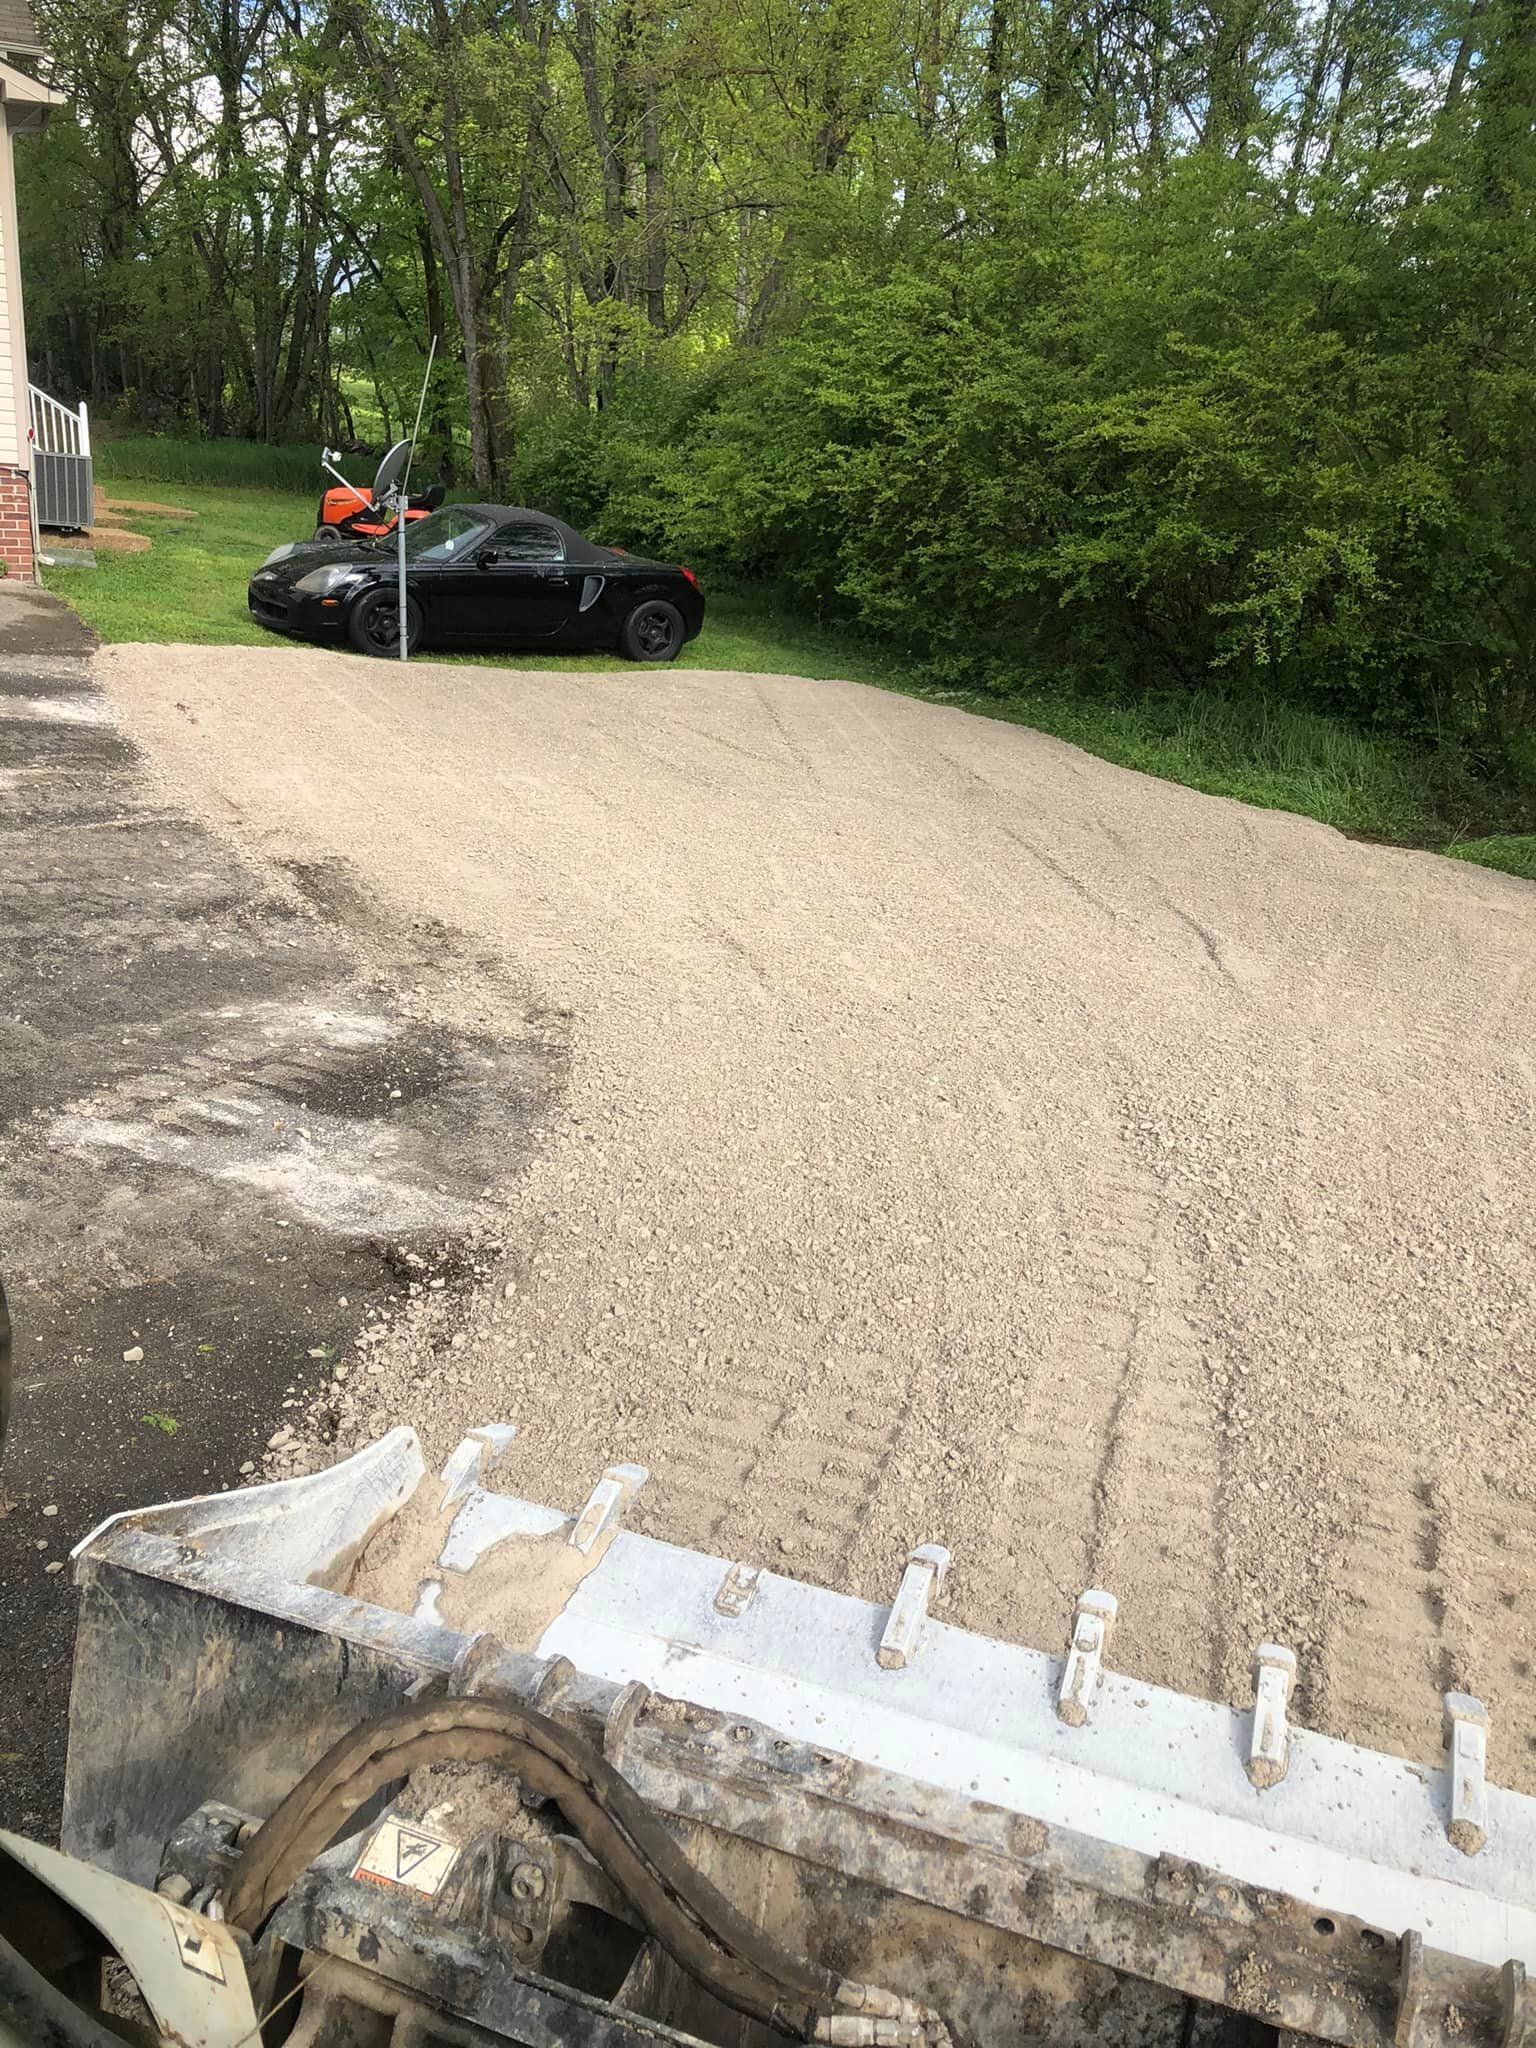 A black car is parked in a gravel driveway next to a tractor.